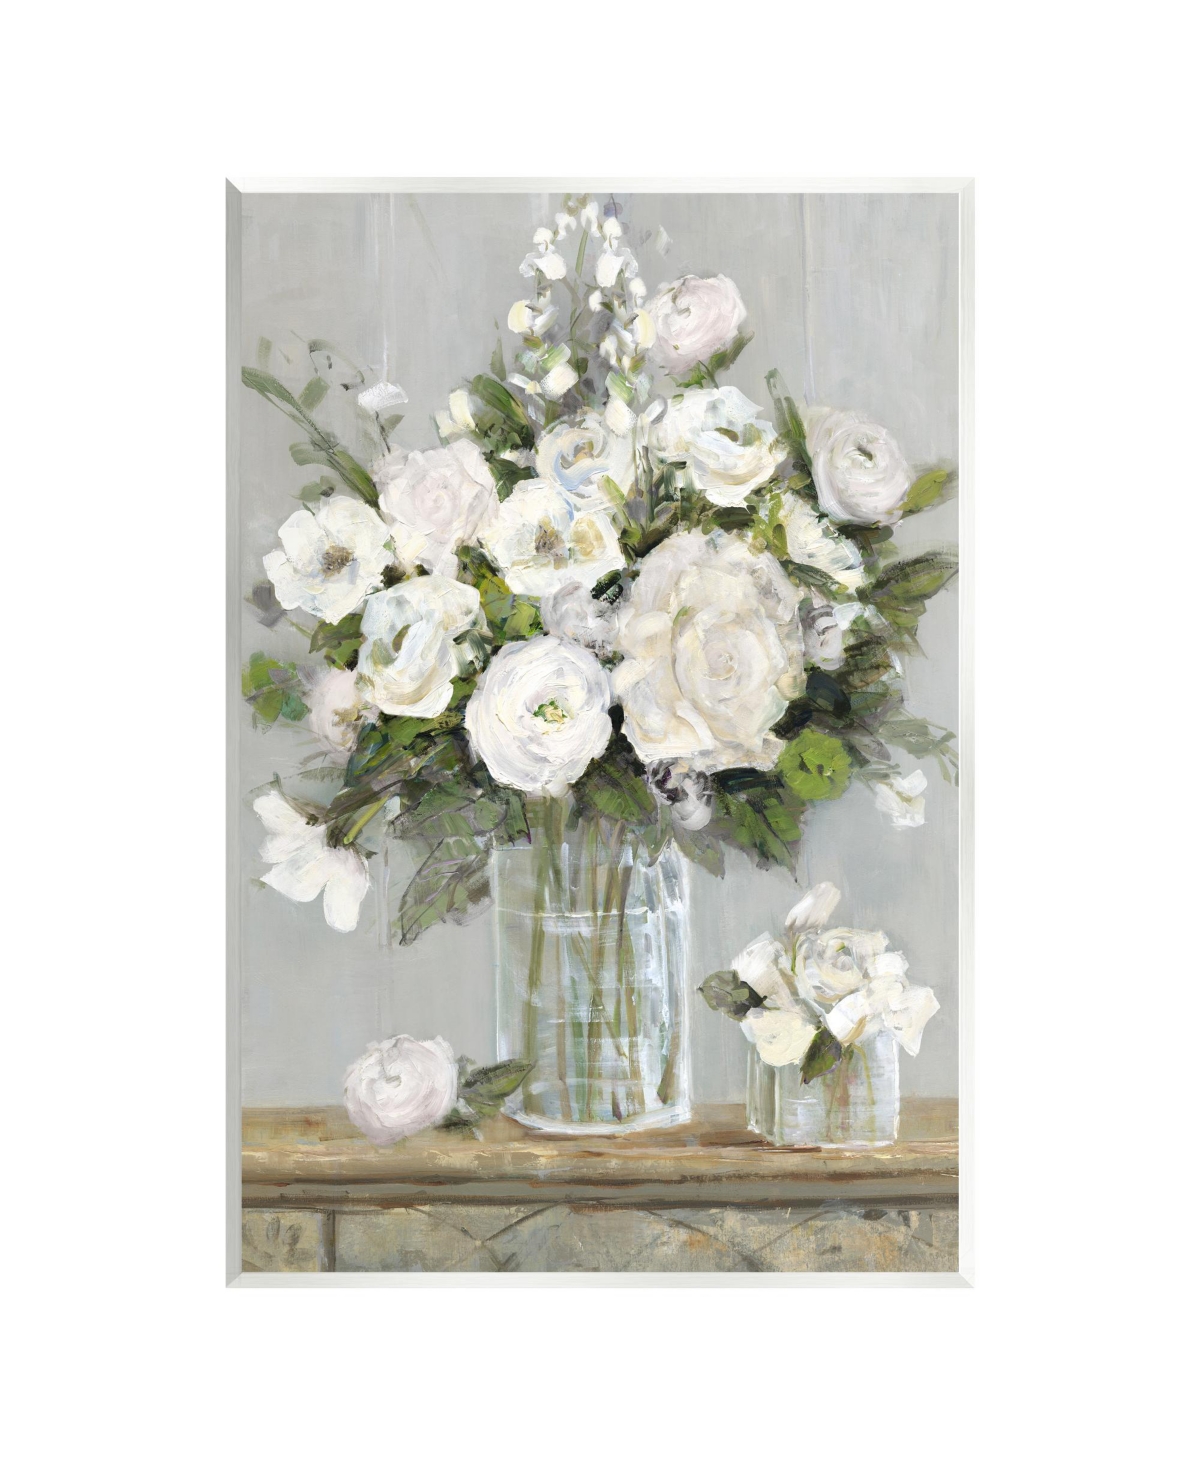 Stupell Industries Country Floral Scene Wall Plaque Art, 13" X 19" In Multi-color